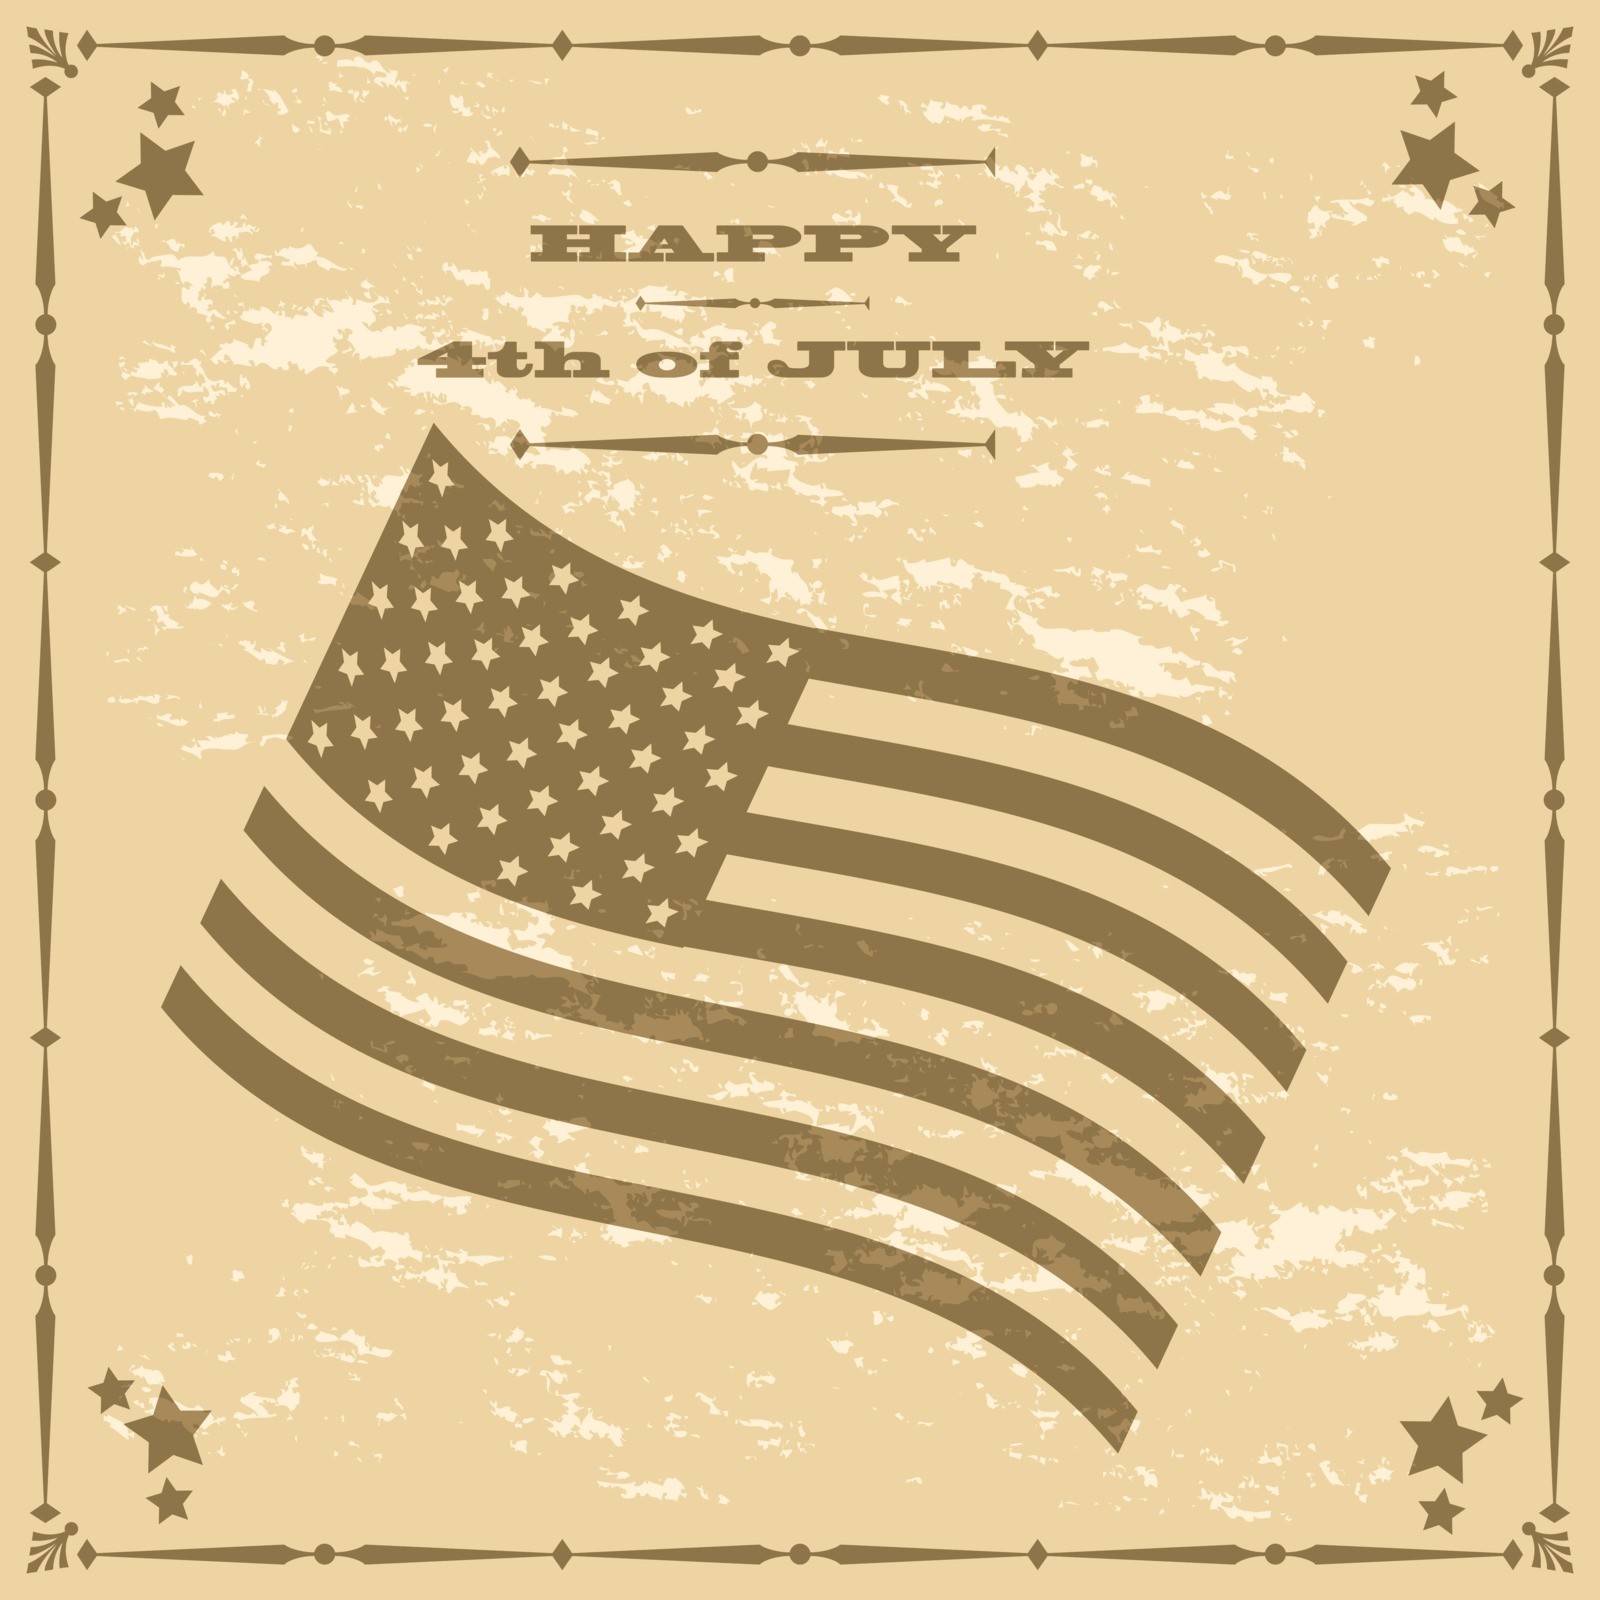 Concept illustration showing a retro style poster for the 4th of July, with an American flag